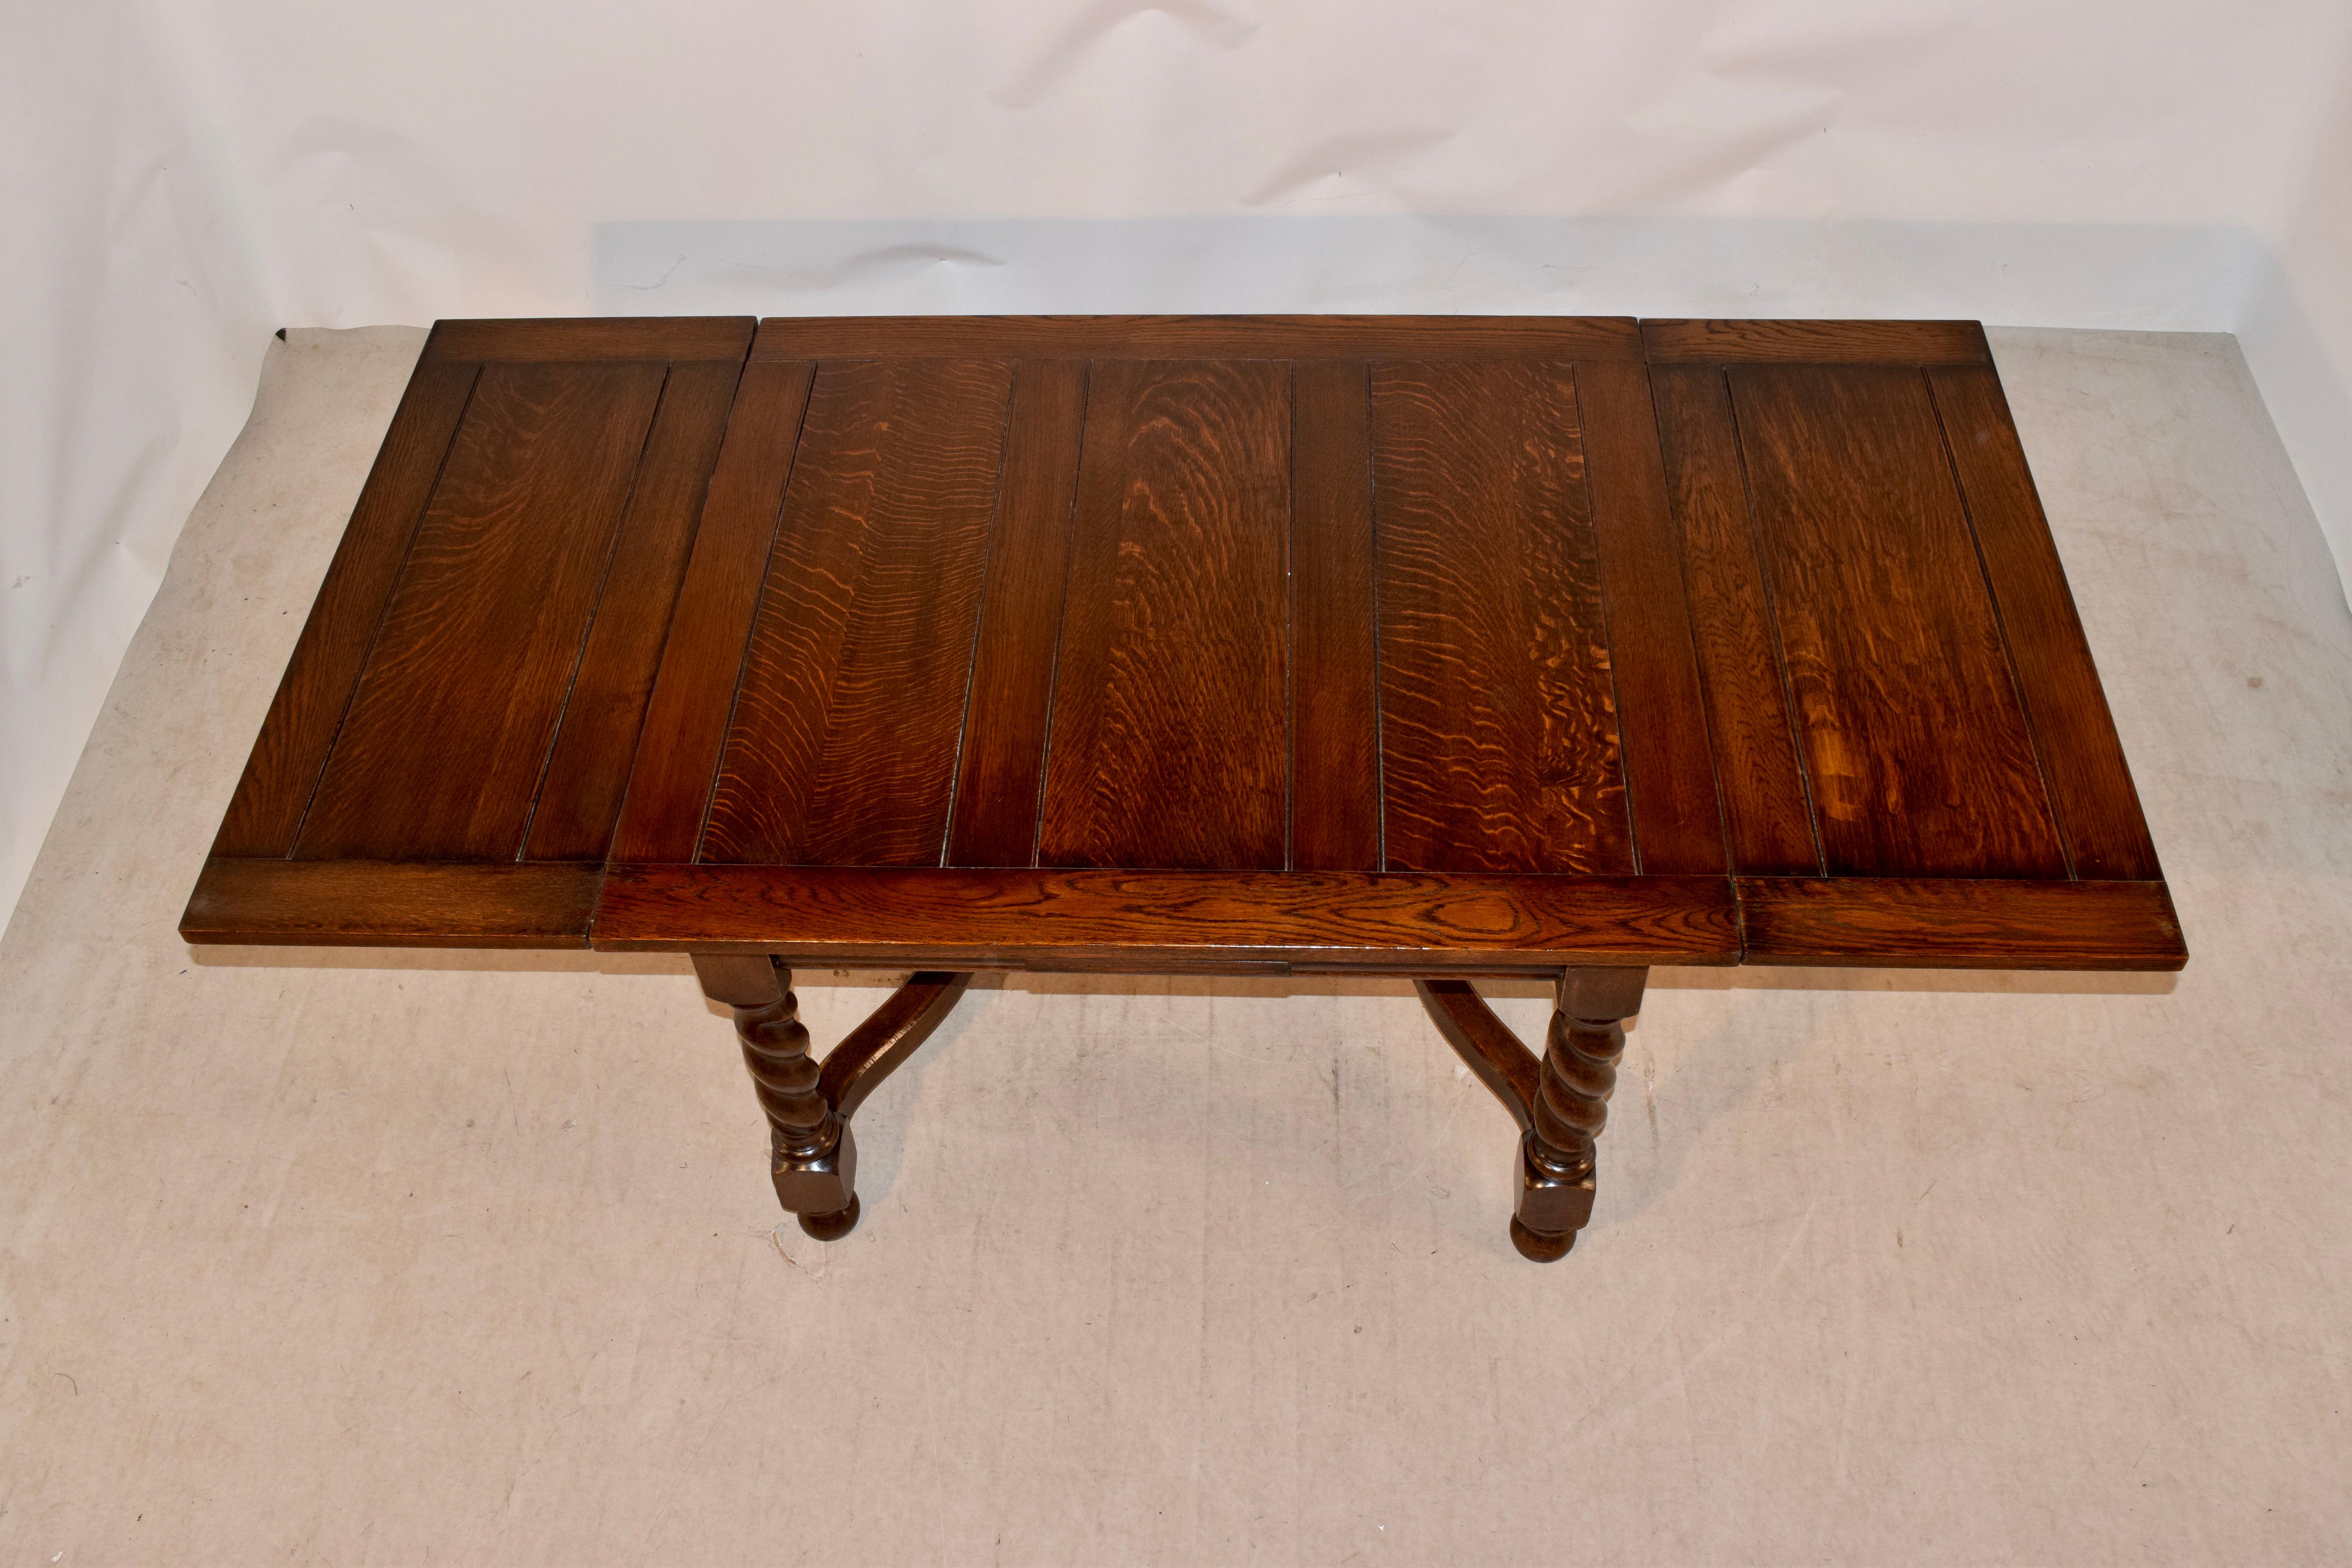 Early 20th Century English Oak Table with Draw Leaves, circa 1900